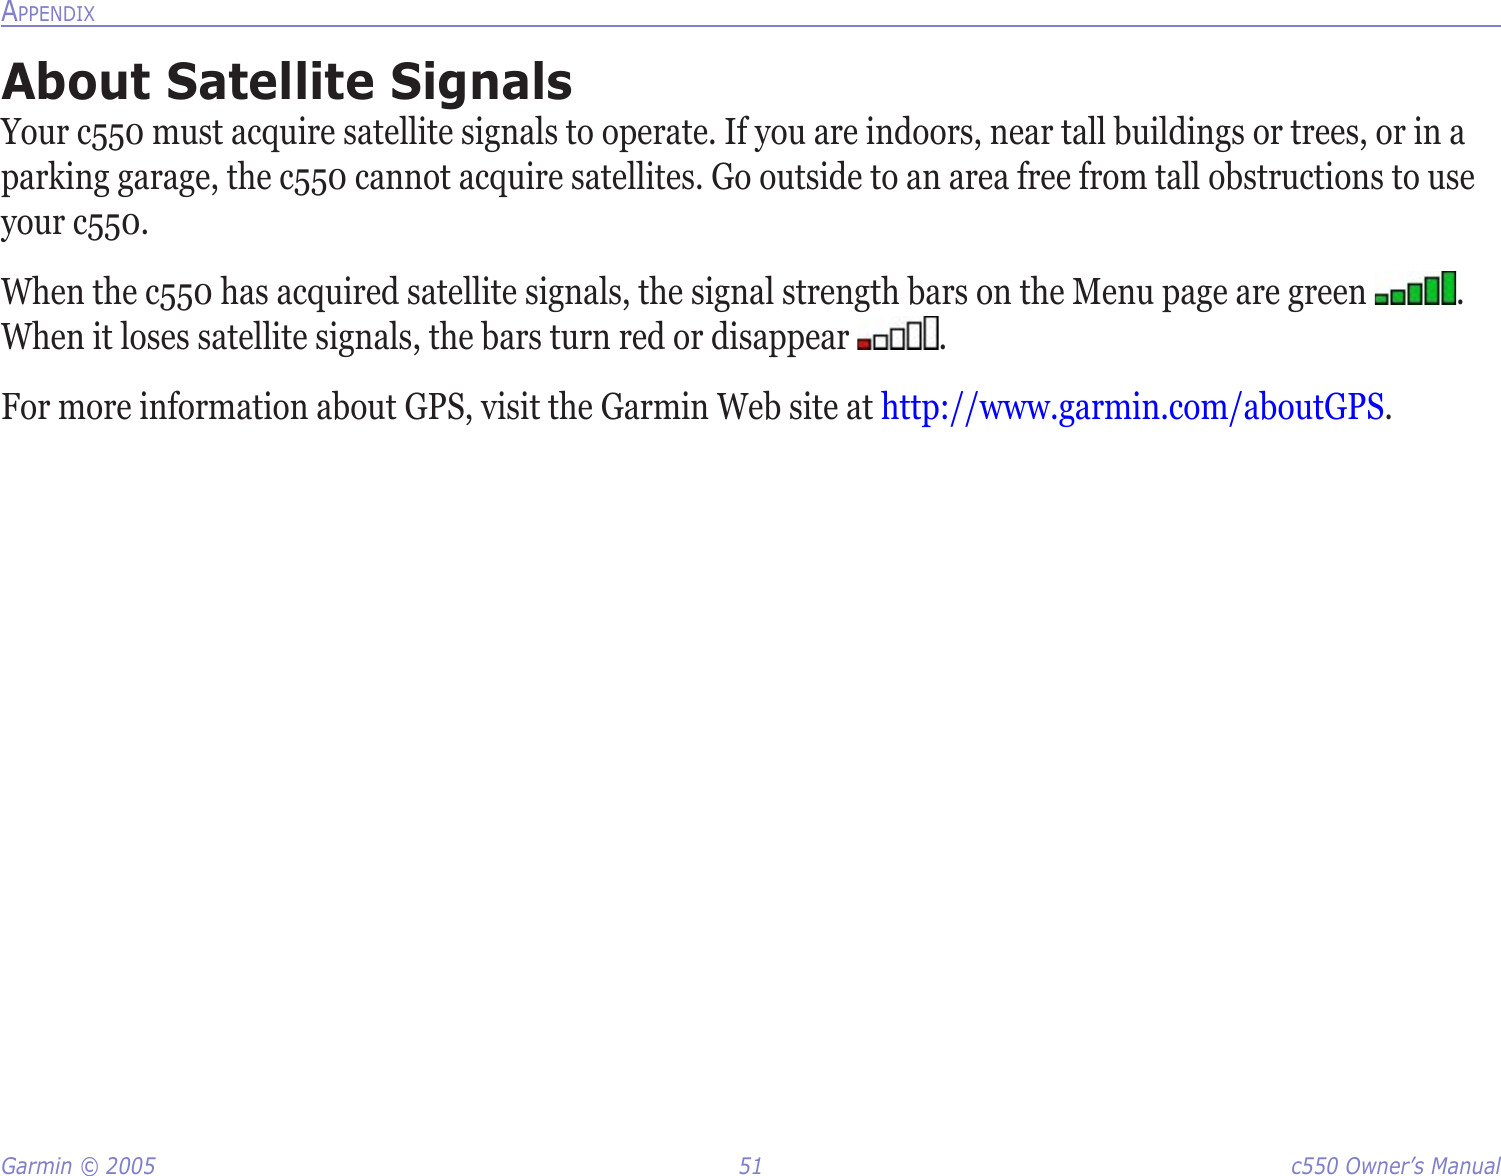 Garmin © 2005  51  c550 Owner’s ManualAPPENDIXAbout Satellite SignalsYour c550 must acquire satellite signals to operate. If you are indoors, near tall buildings or trees, or in a parking garage, the c550 cannot acquire satellites. Go outside to an area free from tall obstructions to use your c550. When the c550 has acquired satellite signals, the signal strength bars on the Menu page are green  . When it loses satellite signals, the bars turn red or disappear  . For more information about GPS, visit the Garmin Web site at http://www.garmin.com/aboutGPS.